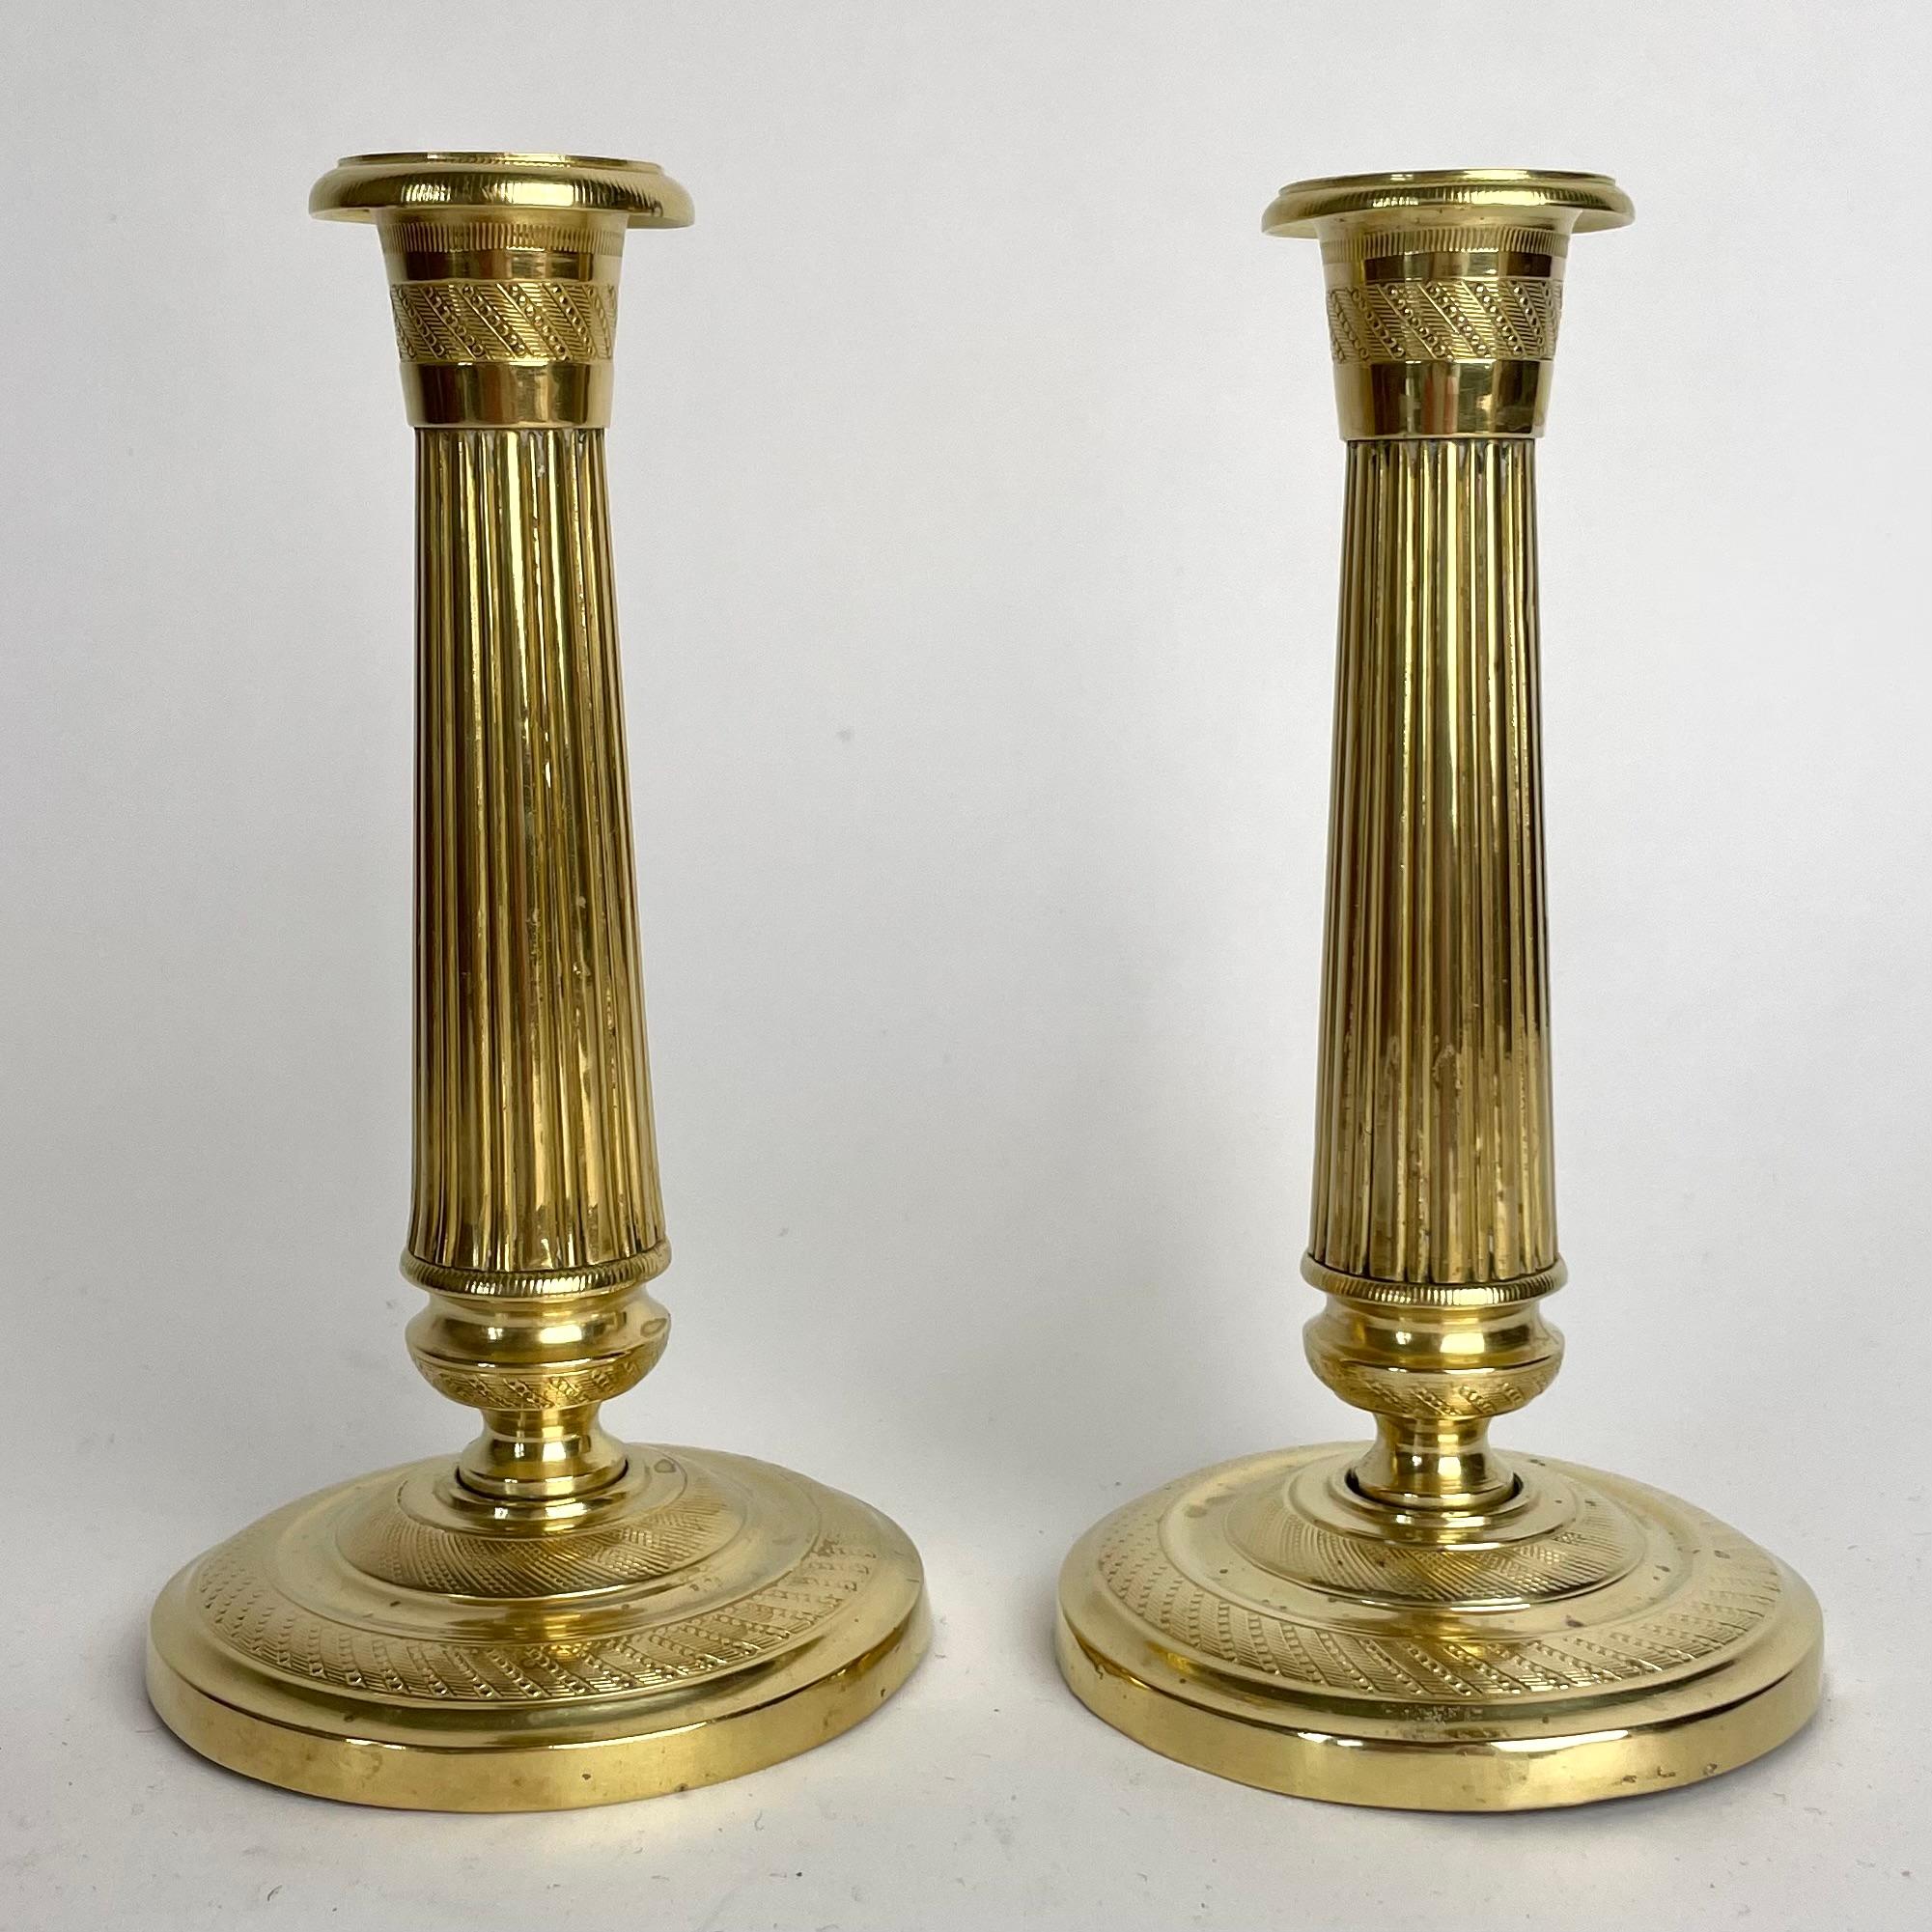 A beautiful pair of small Empire candlesticks in gilt bronze from the 1820s. Very period design.

Wear consistent with age and use 
